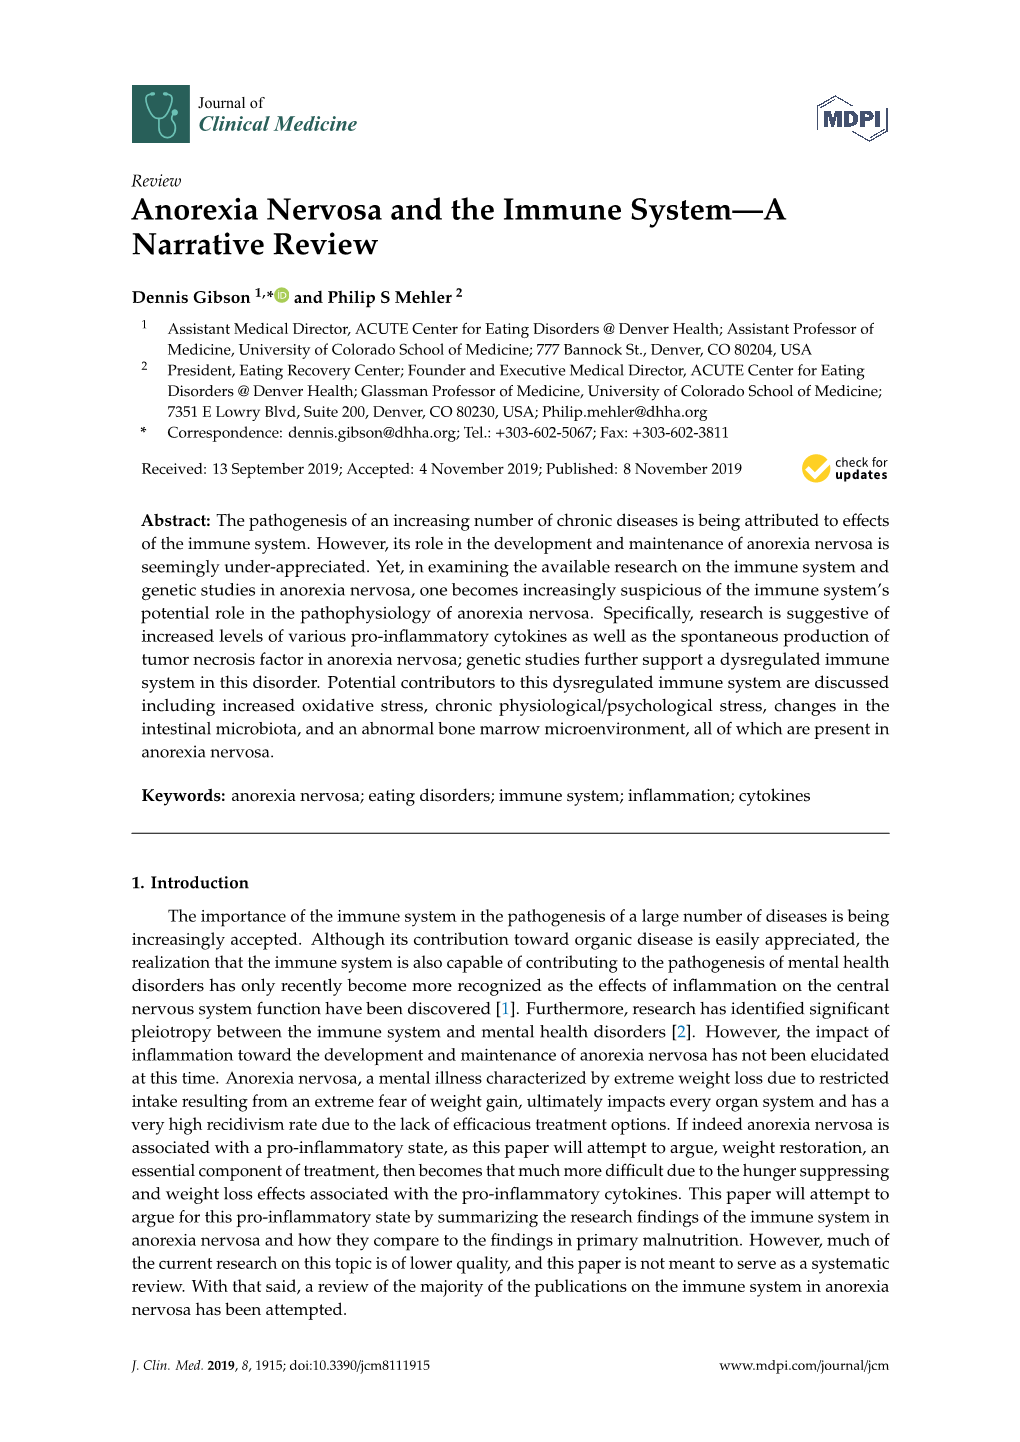 Anorexia Nervosa and the Immune System—A Narrative Review